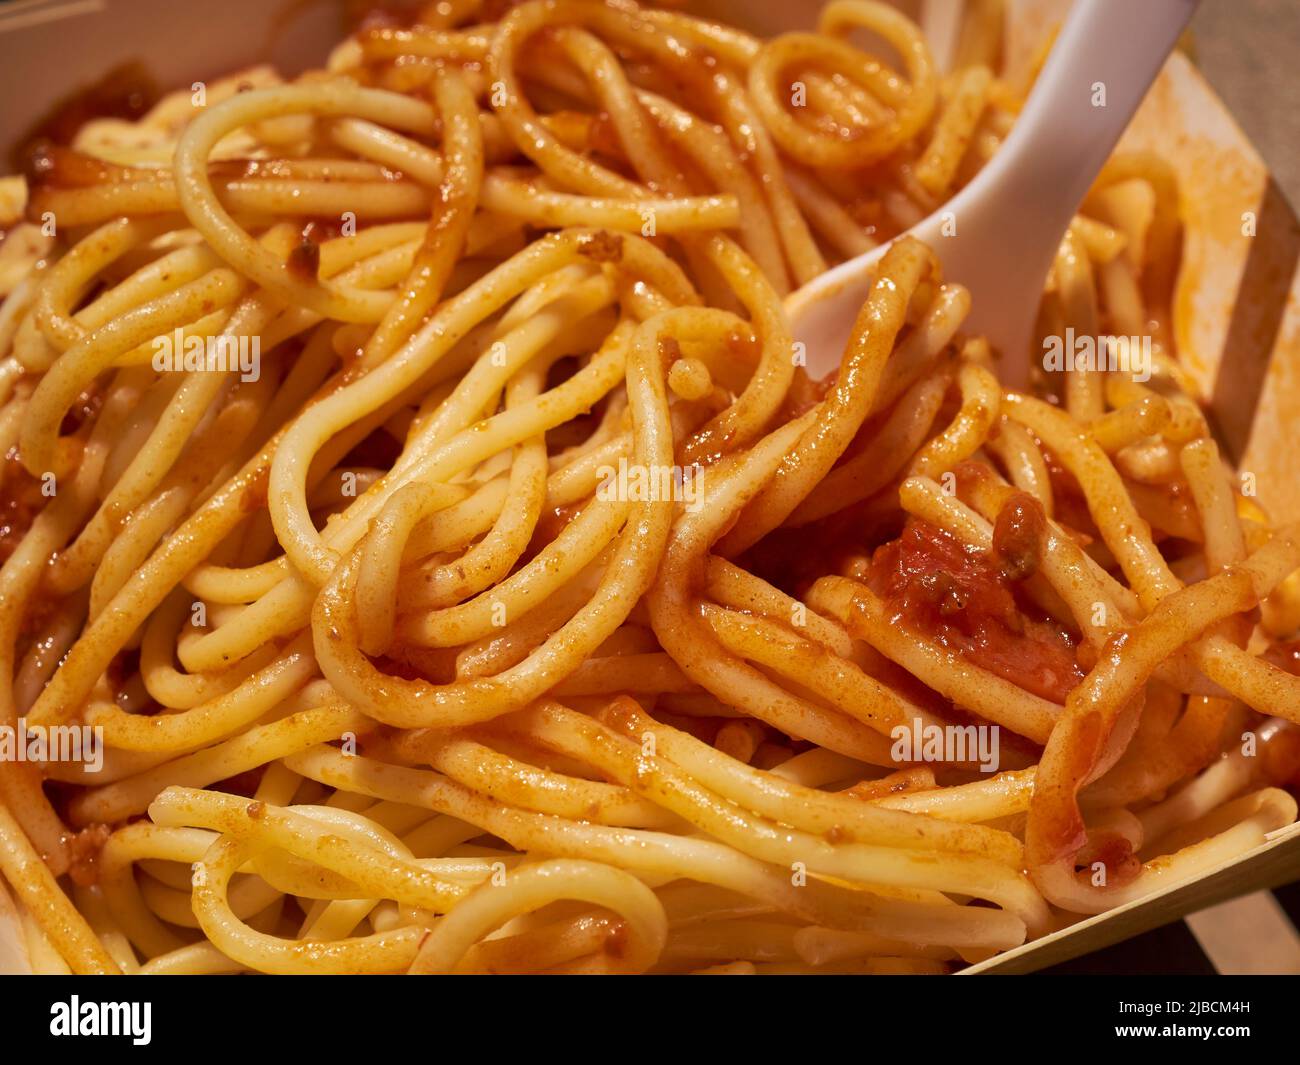 Philapine style sphaghetti with hot dog slices served at a Jollibee fast food restaurant in Queens, NY Stock Photo